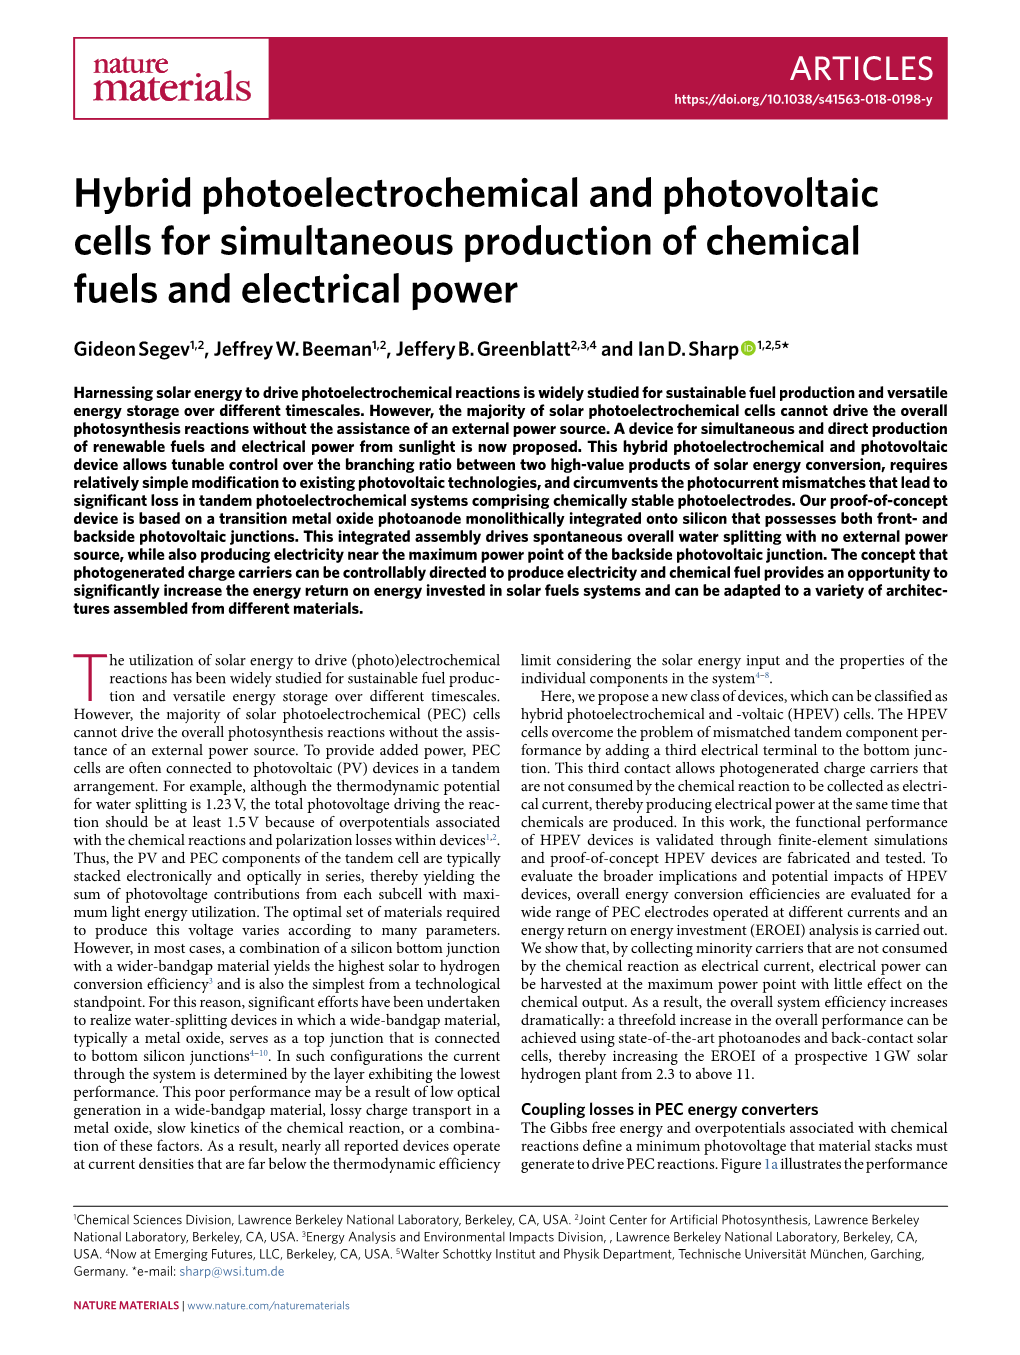 Hybrid Photoelectrochemical and Photovoltaic Cells for Simultaneous Production of Chemical Fuels and Electrical Power